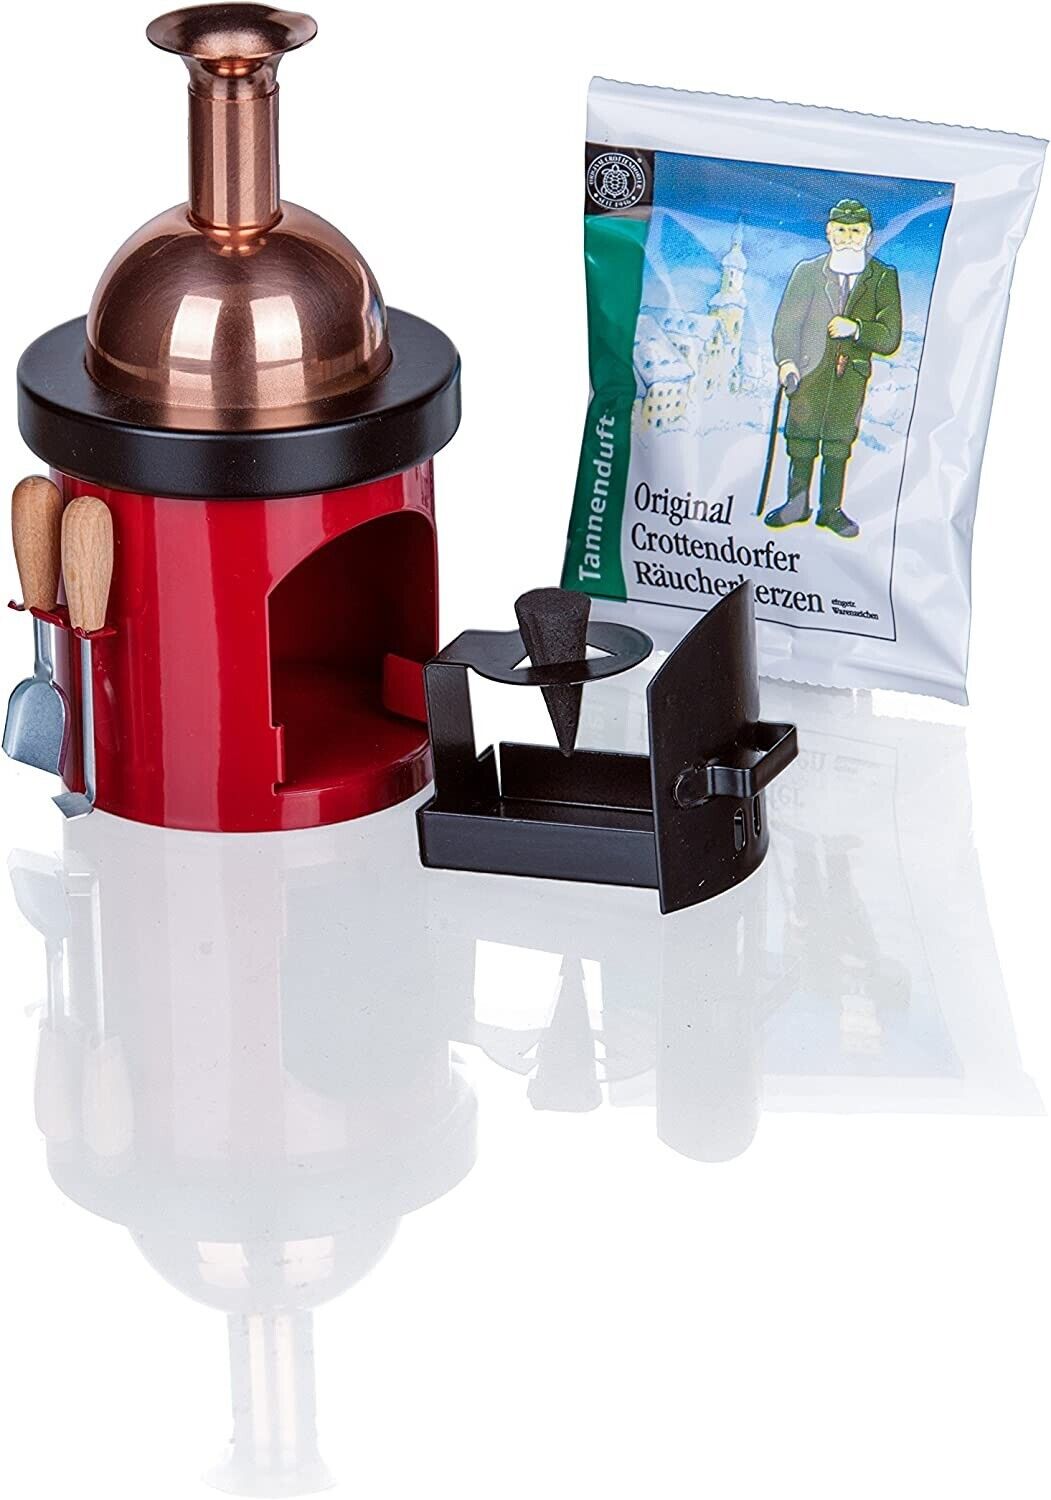 New Small Red Metal Smoker Kettle Made in Germany w/Box & Trial Pack of Incense